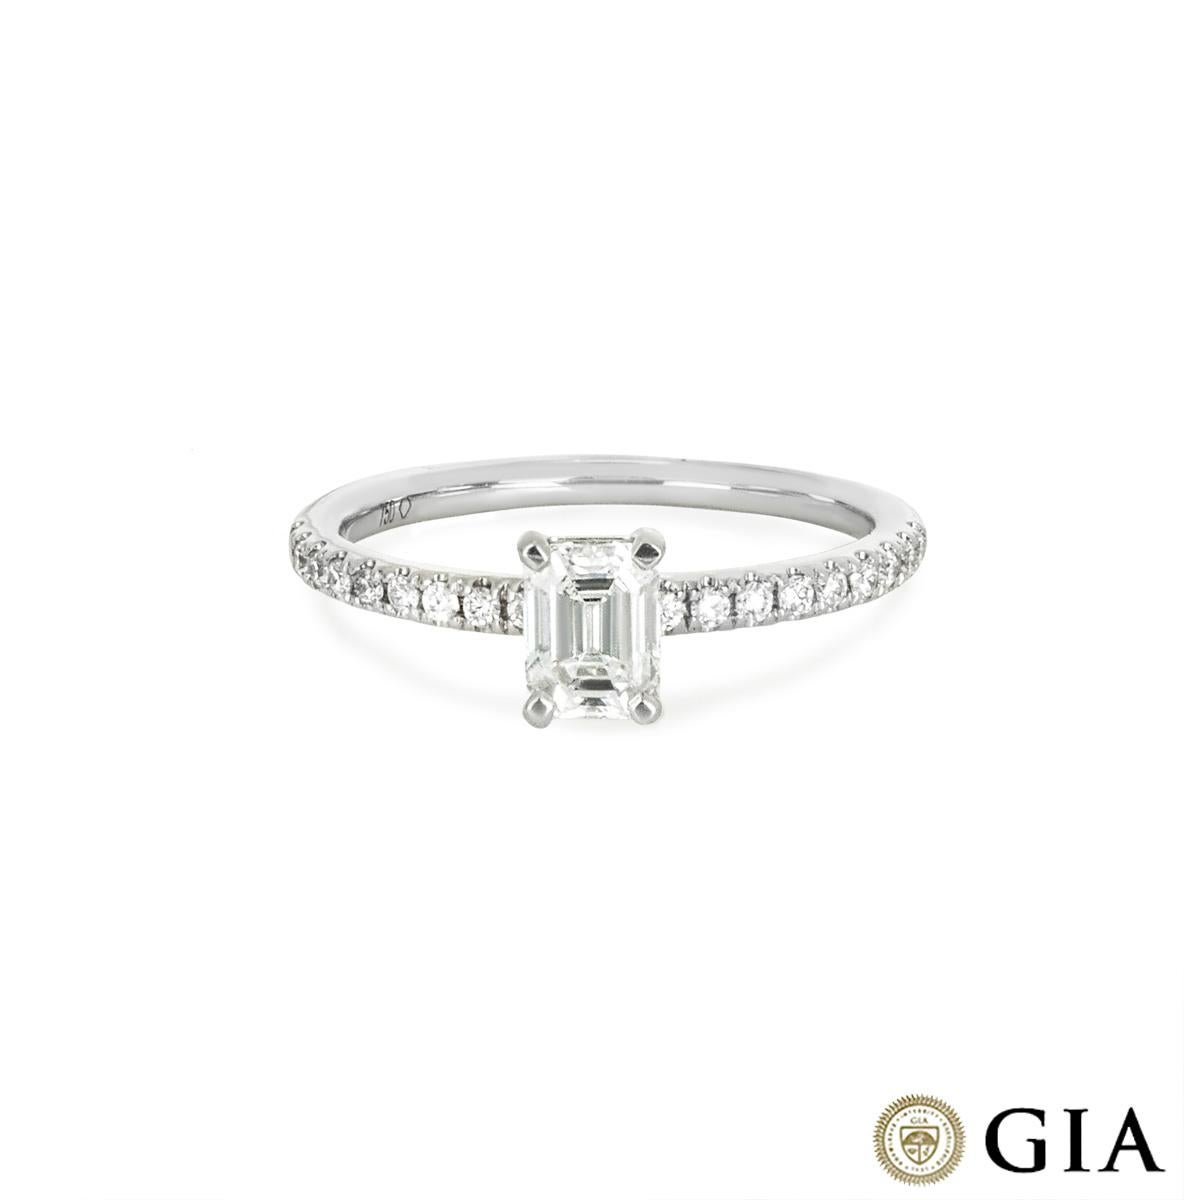 Gia Certified White Gold Emerald Cut Diamond Ring 0.59 Carat D/VS1 In New Condition For Sale In London, GB